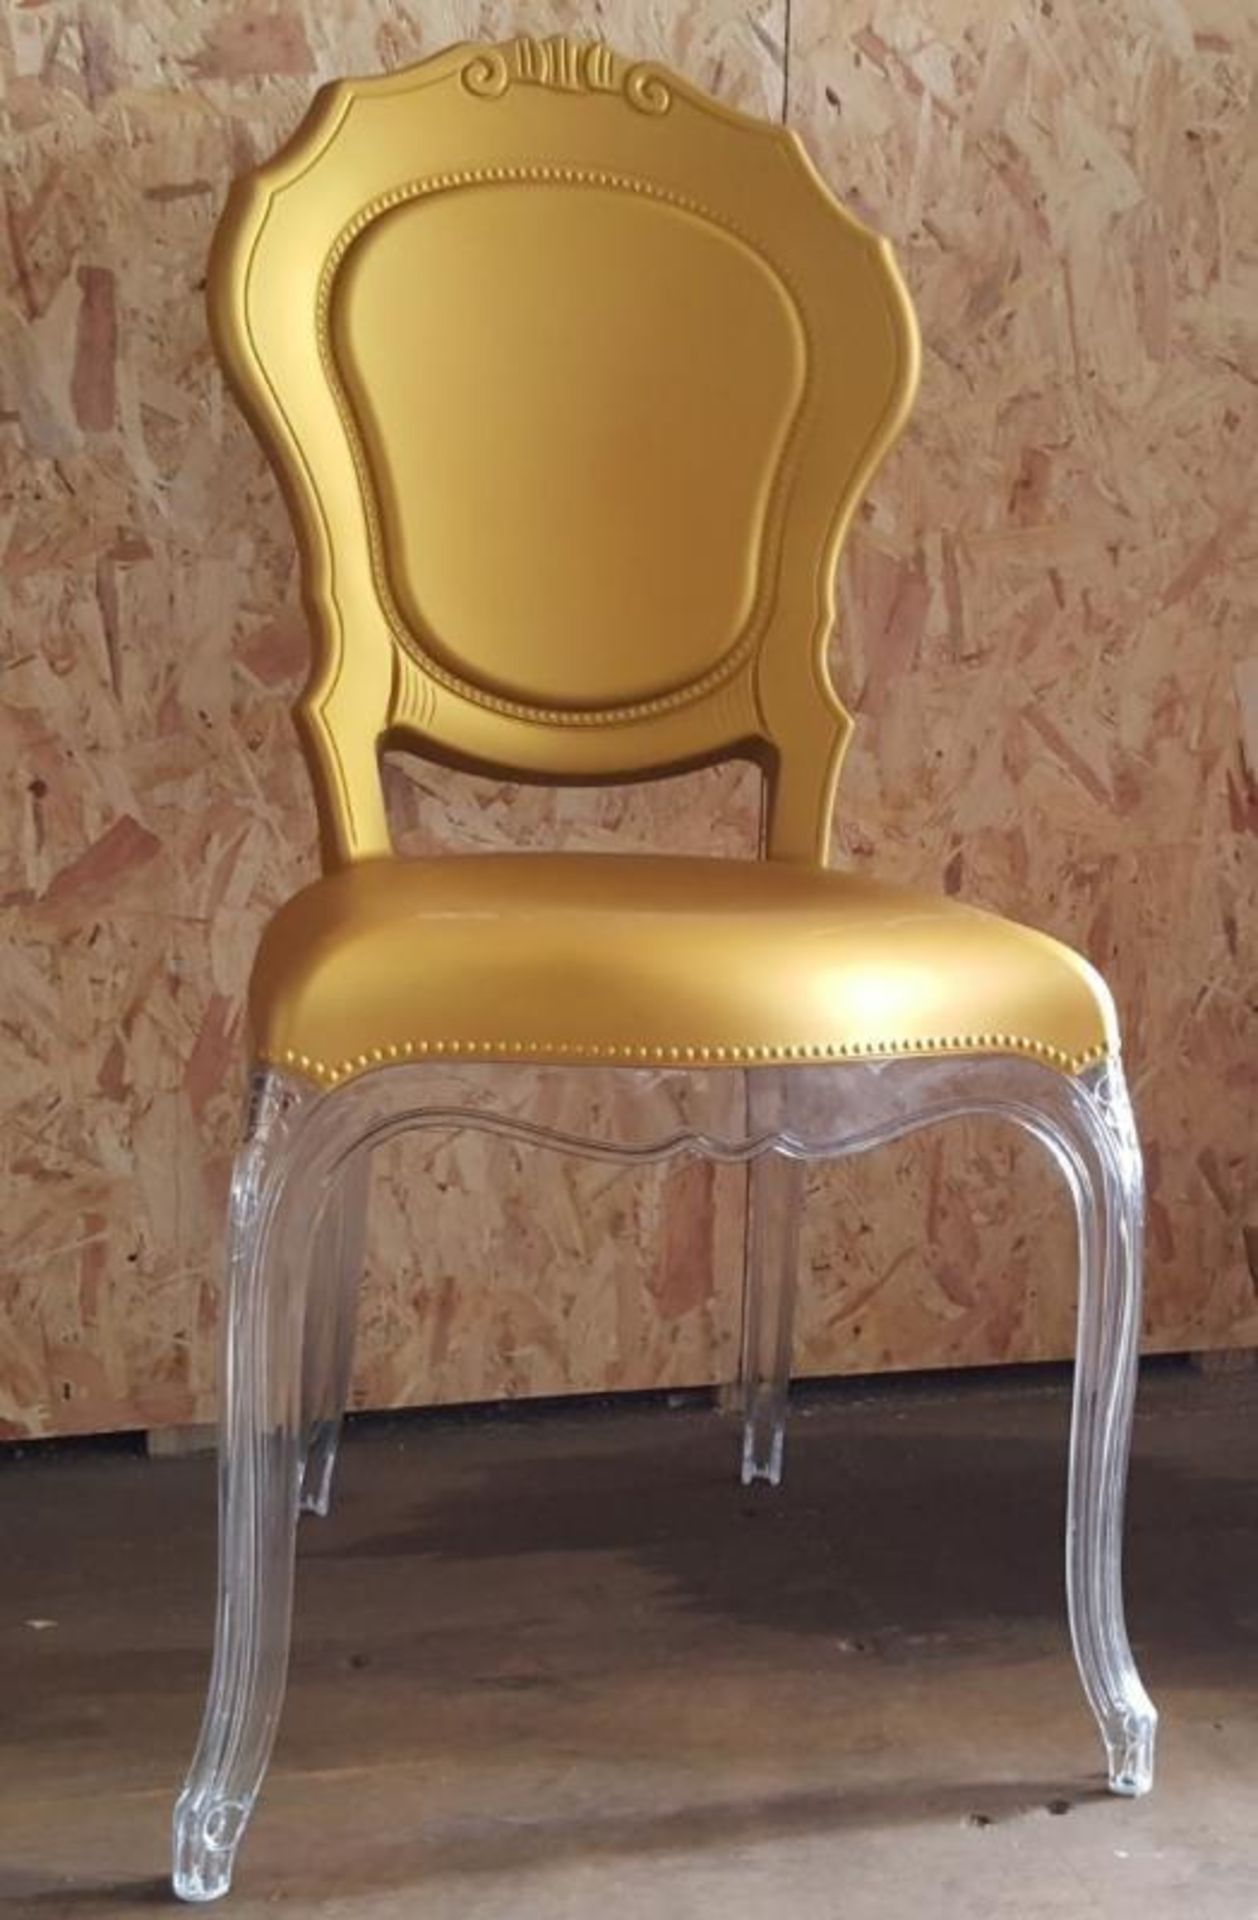 5 x Acrylic Baroque-style 'Belle Epoque' Chairs Featuring A Clear Polycarbonate Frame With An Attrac - Image 4 of 5